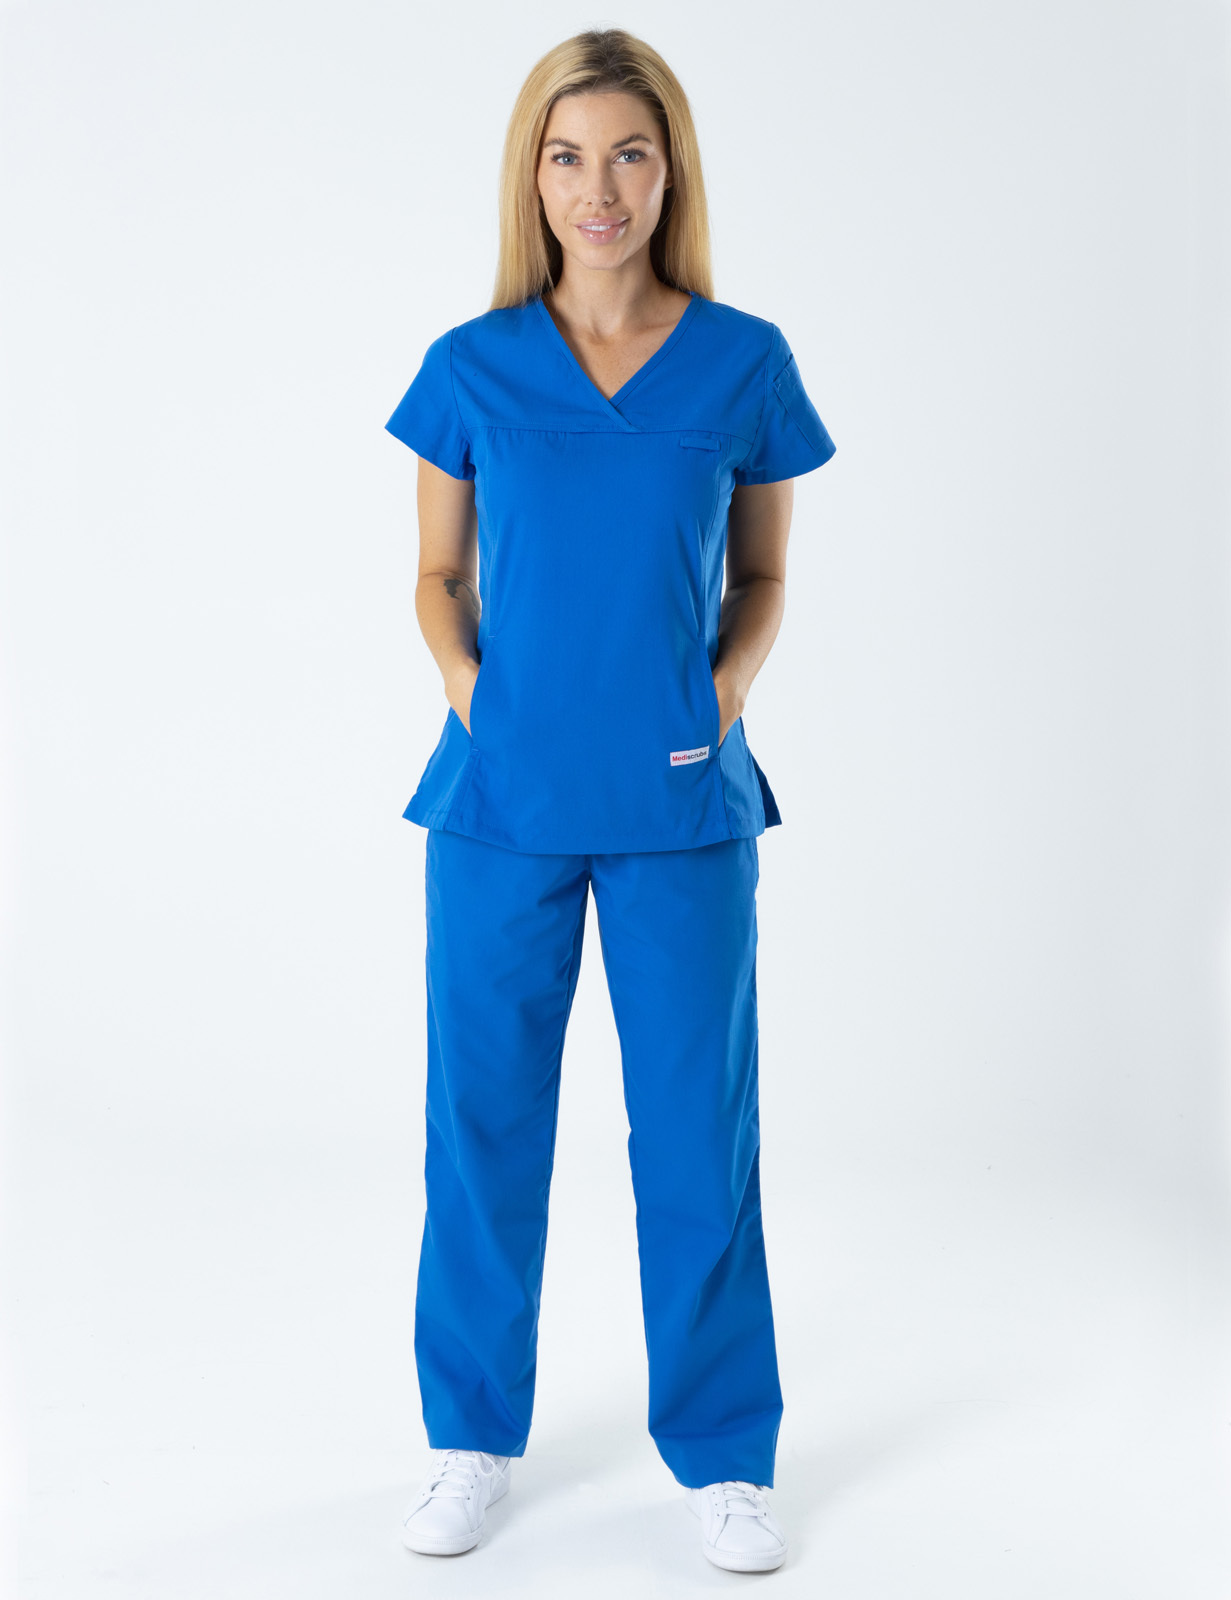 Innisfail Hospital - ED RIP RN (Women's Fit Solid Scrub Top and Cargo Pants in Royal incl Logos)